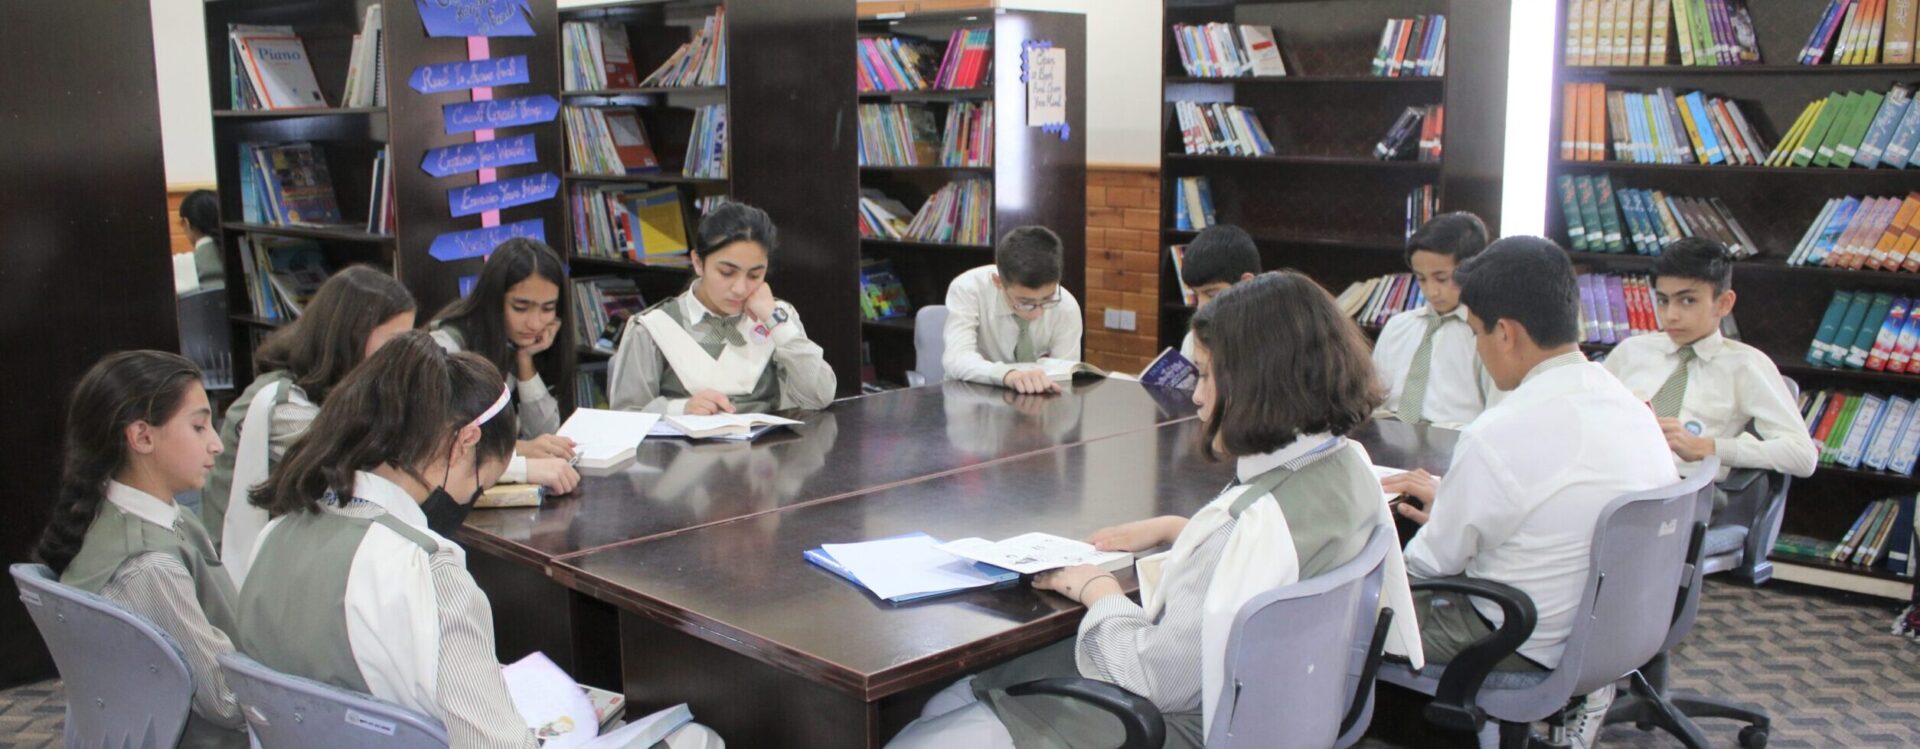 Students Studying at Library